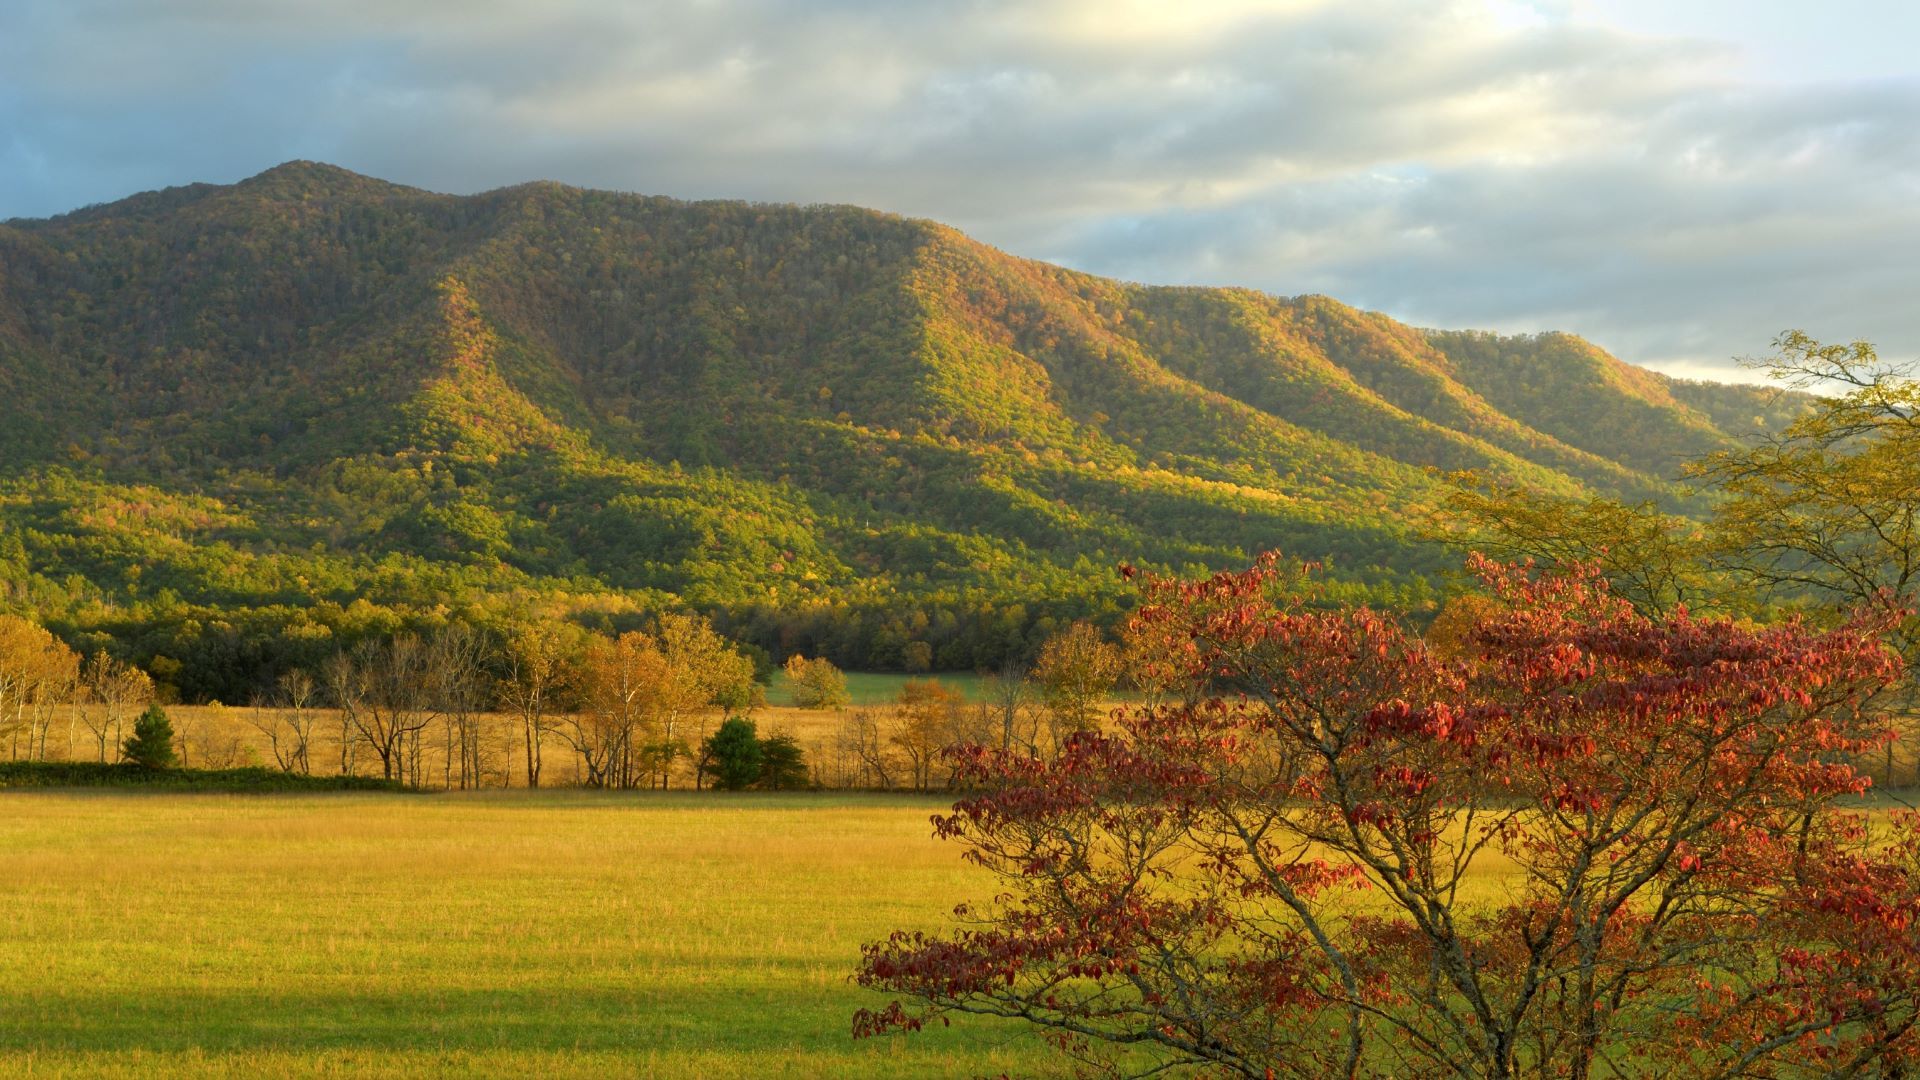 A Large Green Field With A Mountain In The Background